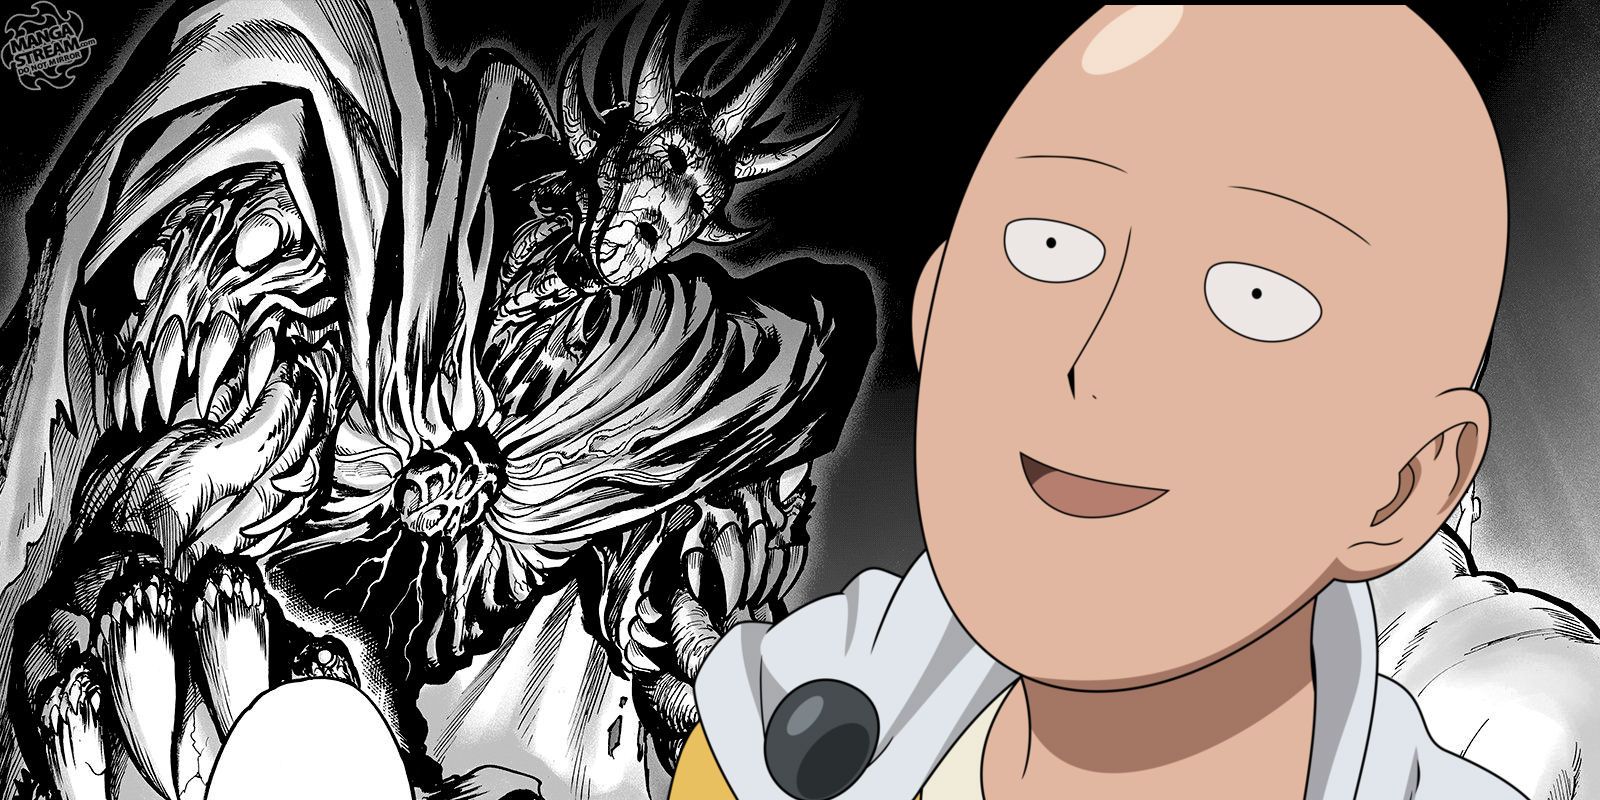 One Punch Man Season 3; Everything about rumored release